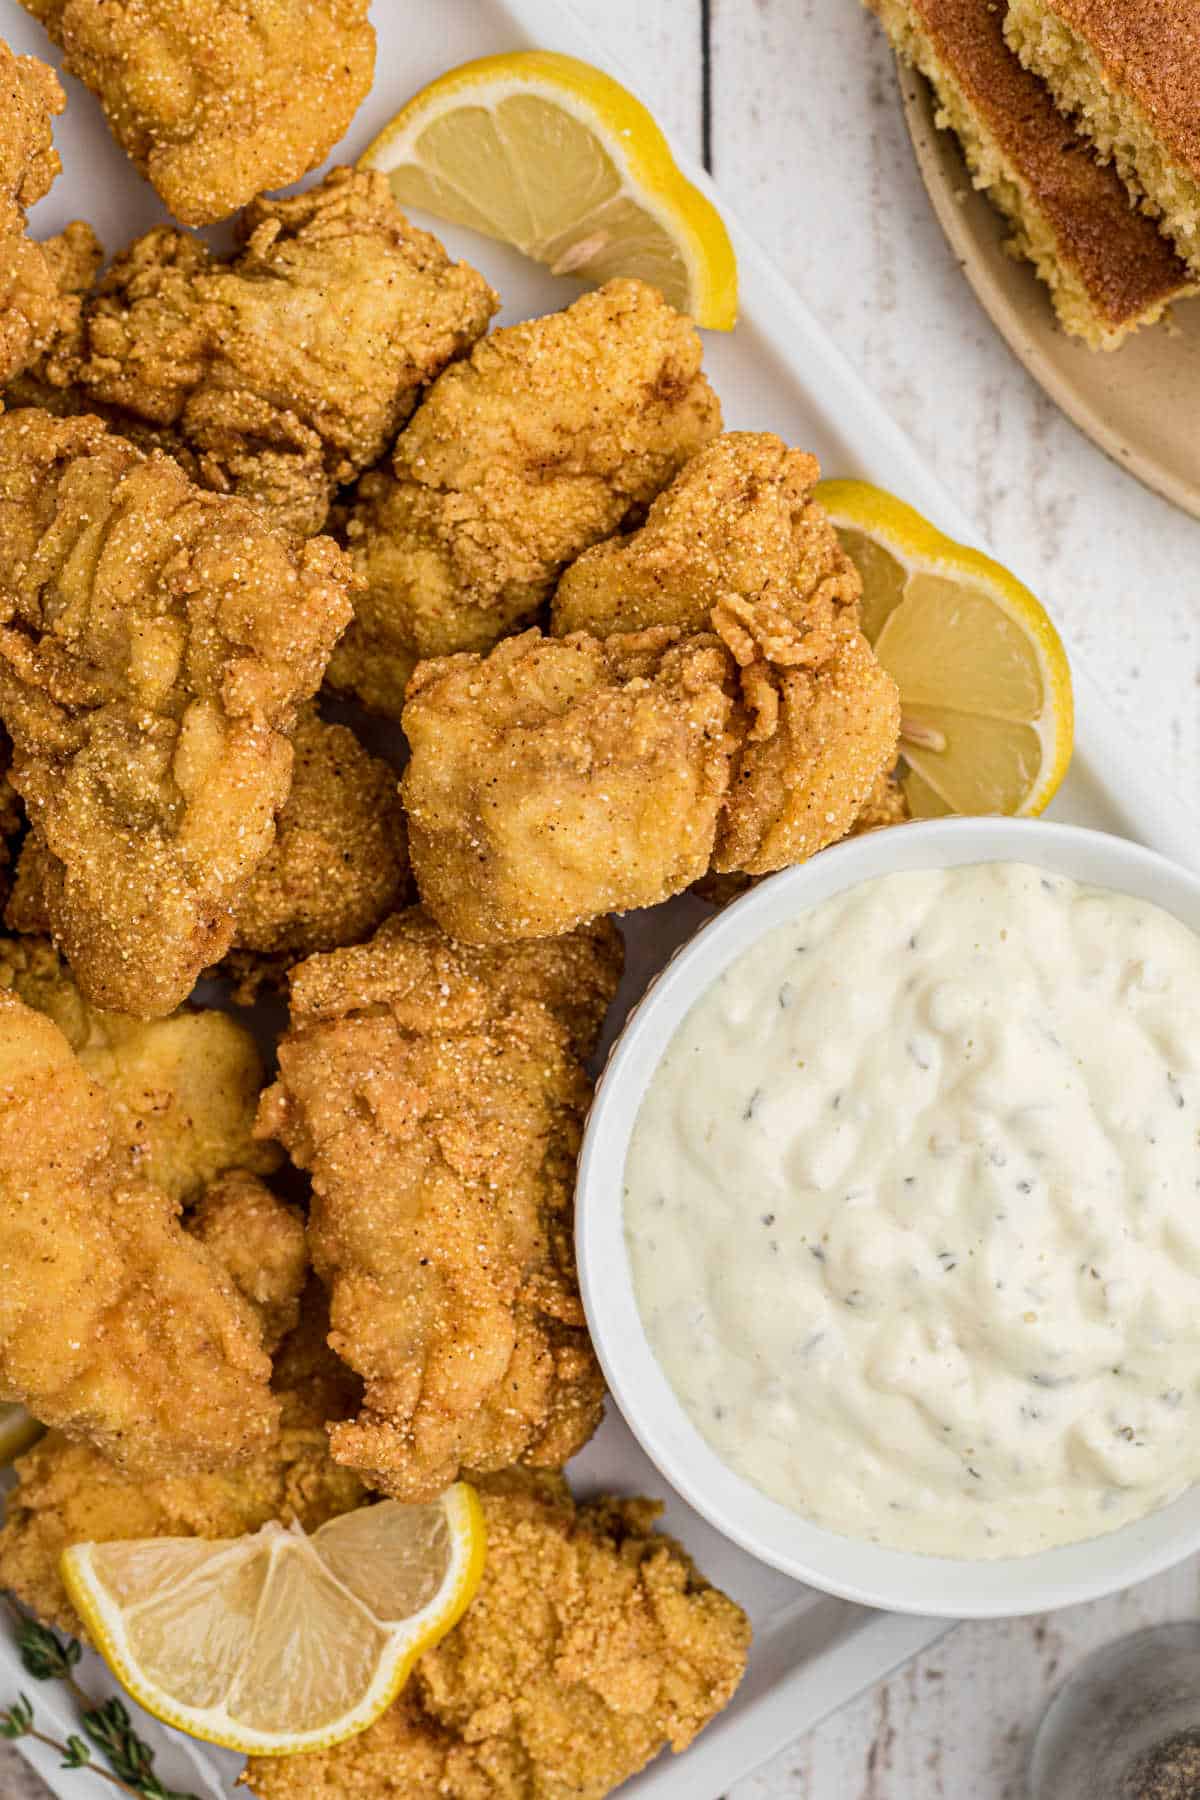 A plate of fried catfish nuggets with some slices of lemon and tartar sauce